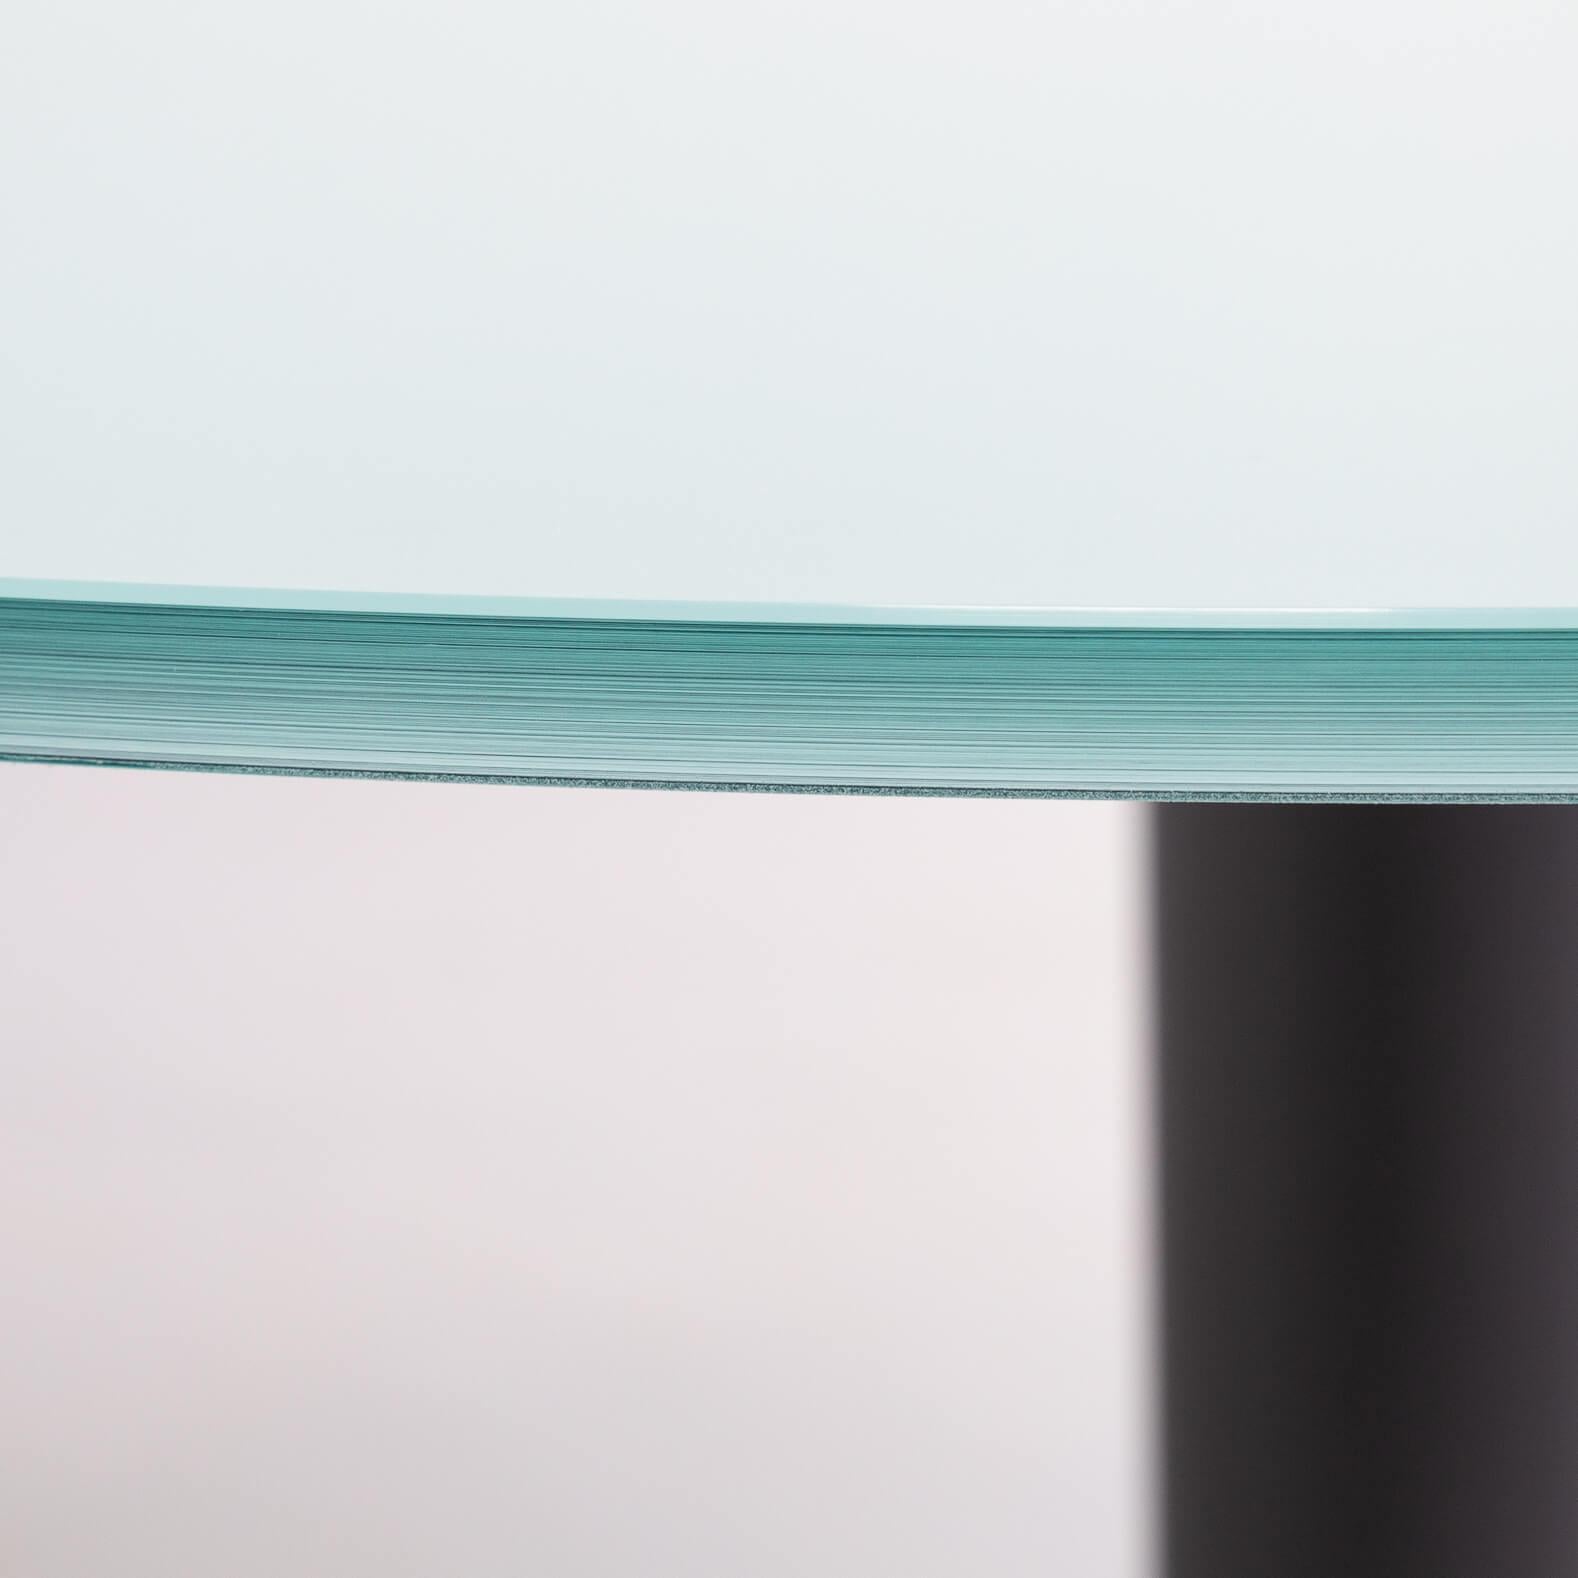 1980s Massimo and Lella Vignelli ‘Calice’ Dining Table for Poltrona Frau For Sale 1